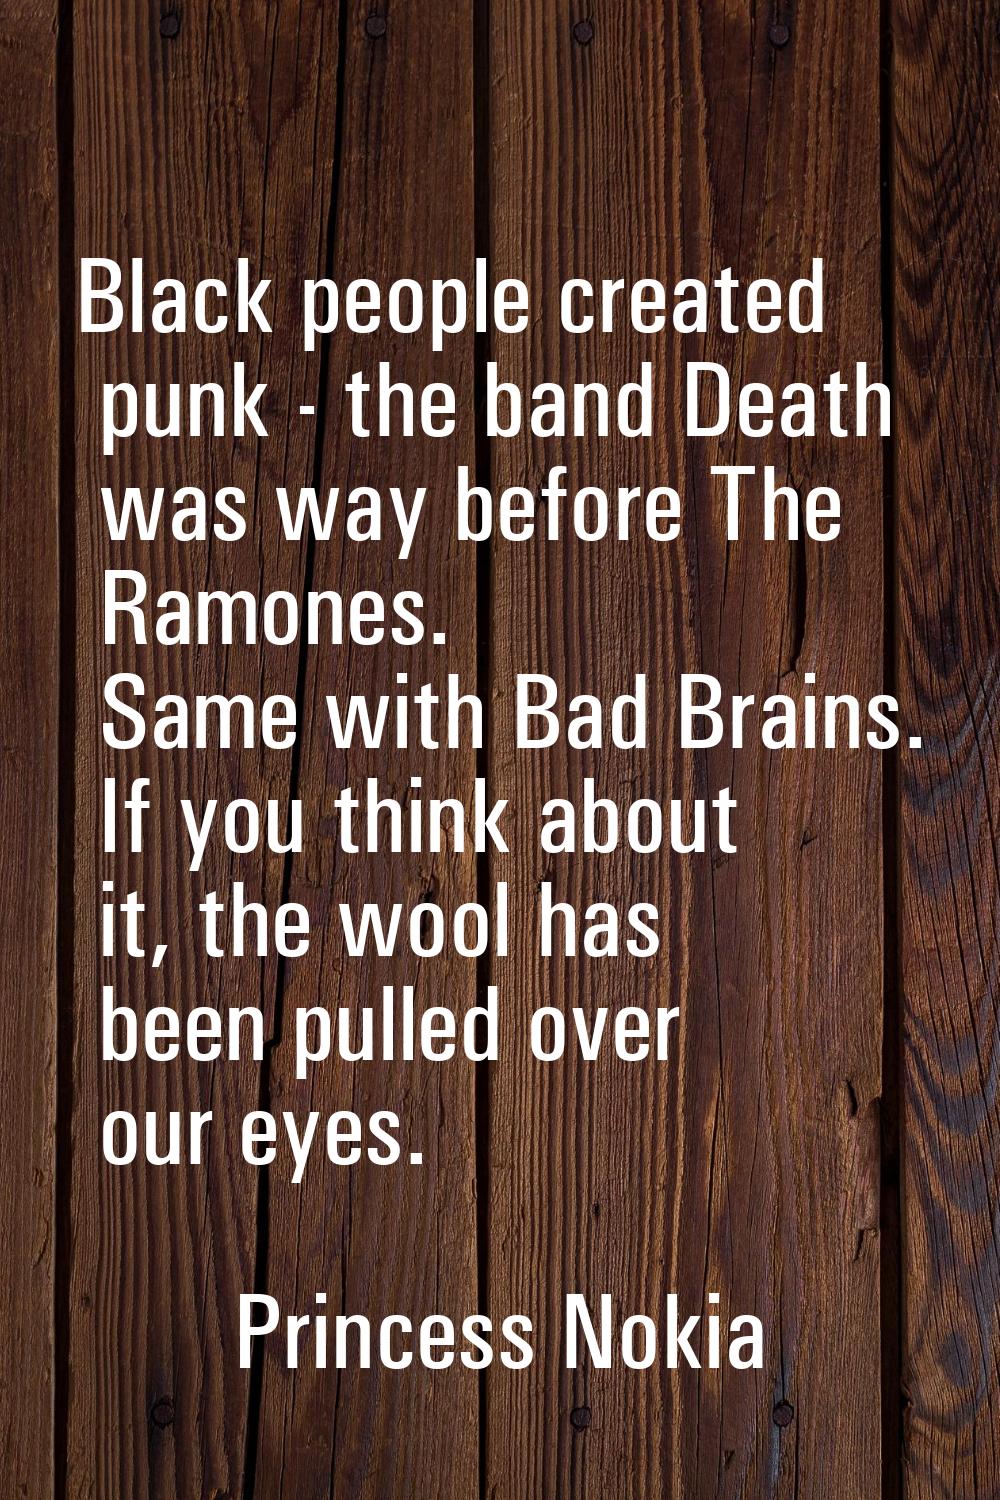 Black people created punk - the band Death was way before The Ramones. Same with Bad Brains. If you